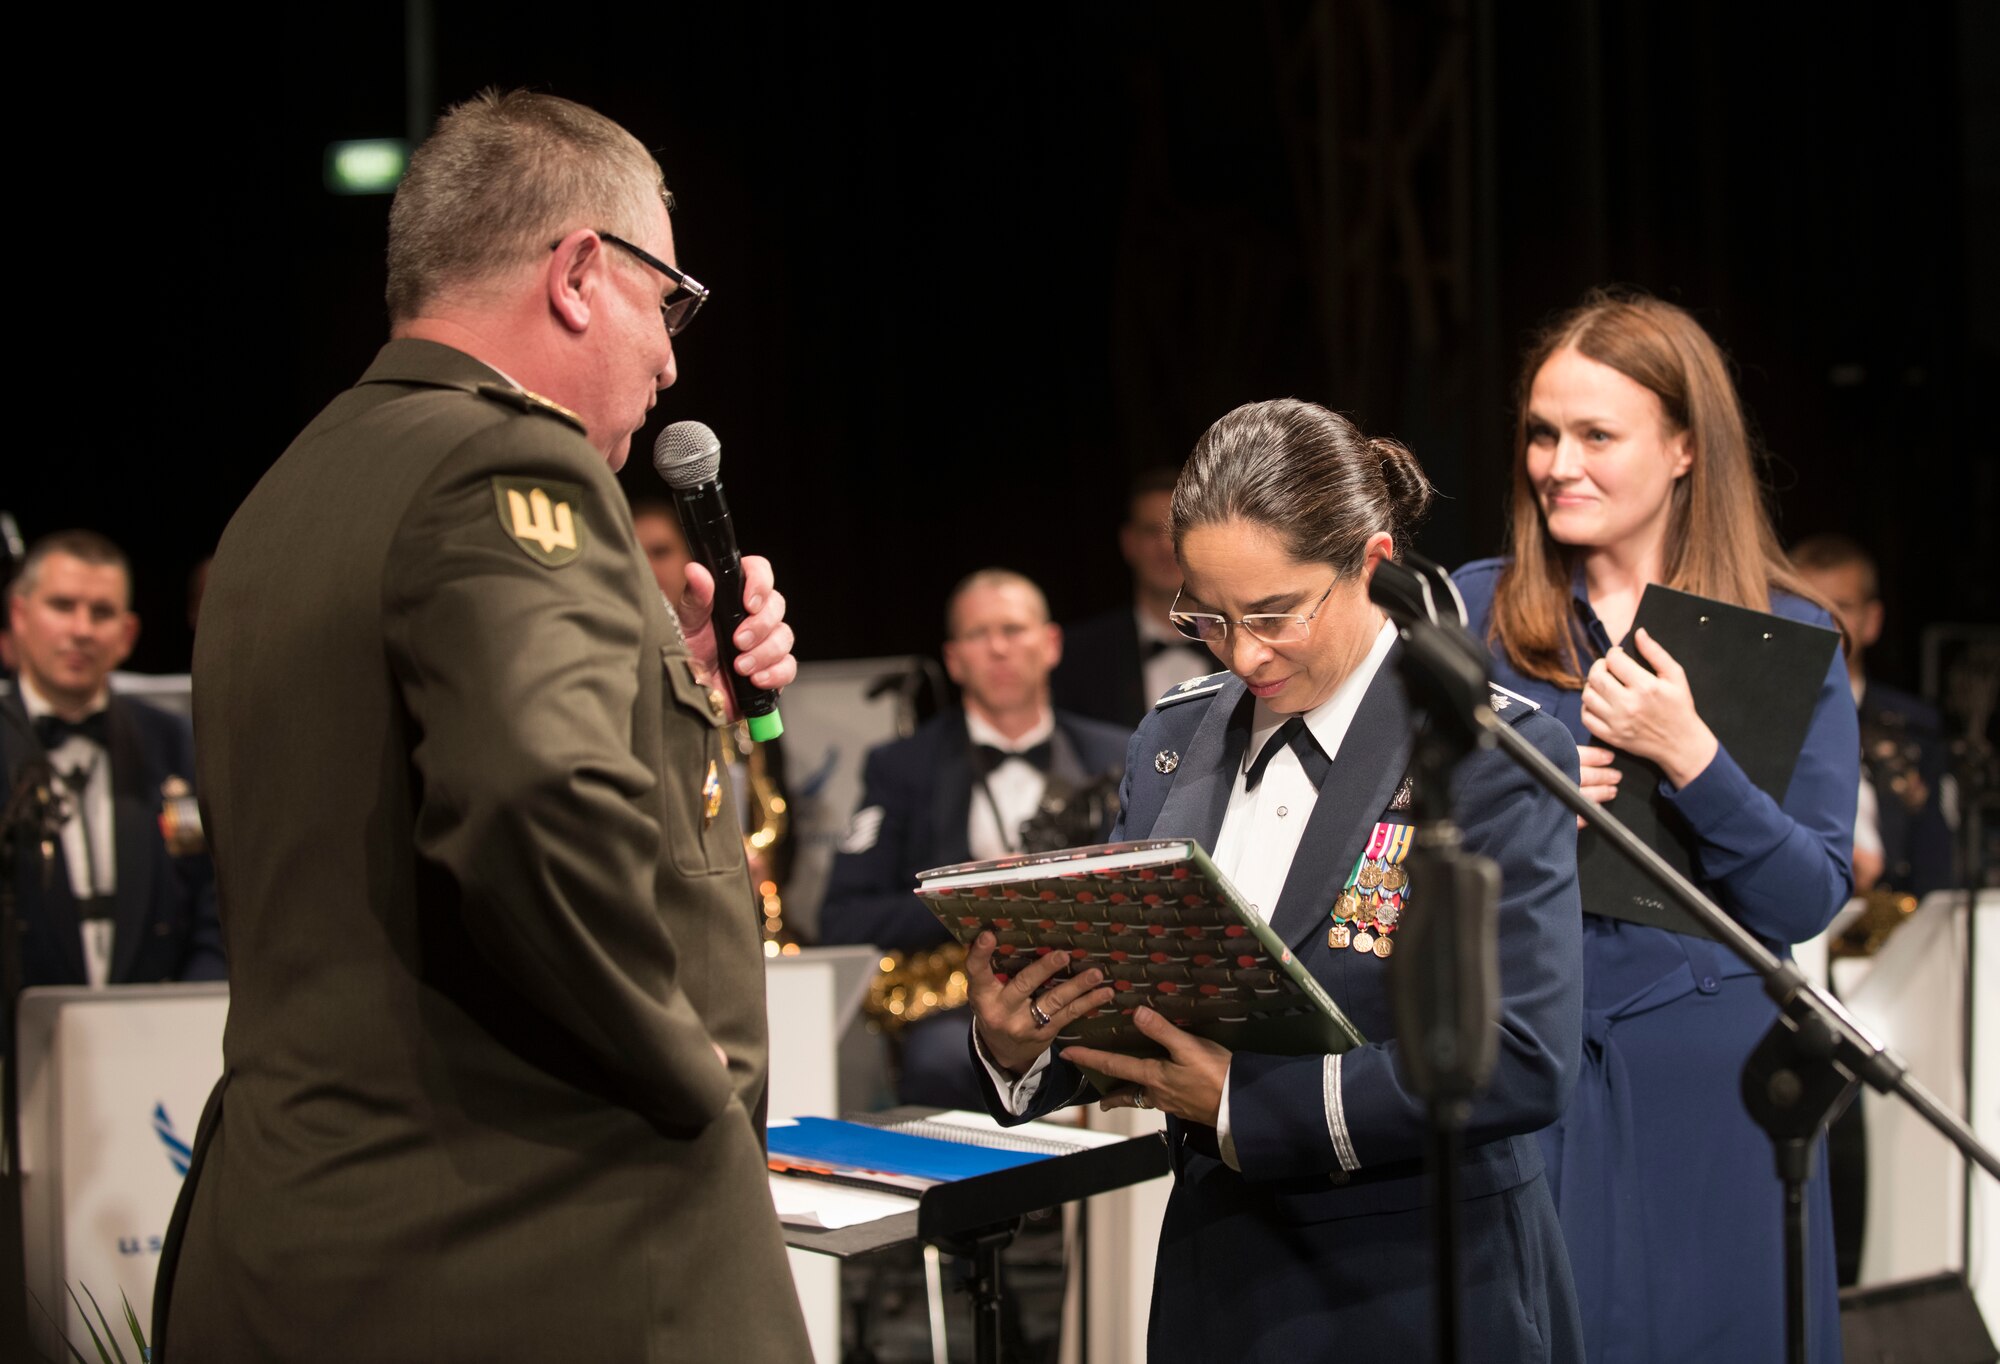 U.S. Air Force Lt. Col Cristina Moore Urrutia, U.S. Air Forces in Europe Ambassadors Jazz Band commander and conductor, accepts a gift from National Ground Forces of Ukraine Lt. Gen. Pavlo Tkachuk, Chief of L’viv Garrison, after the USAFE Band performed a concert with the L’viv Opera Chamber Orchestra and Ukrainian National Presidential Orchestra at the Lviv National Opera, Lviv, Ukraine, October 9, 2019. The USAFE Band traveled to six cities in central and western Ukraine October 6-20, 2019 to conduct the “Music of Freedom” tour, which celebrated the shared spirit of freedom and enduring partnership between U.S. and Ukrainian armed forces. (U.S. Air Force photo by Airman 1st Class Jennifer Zima)